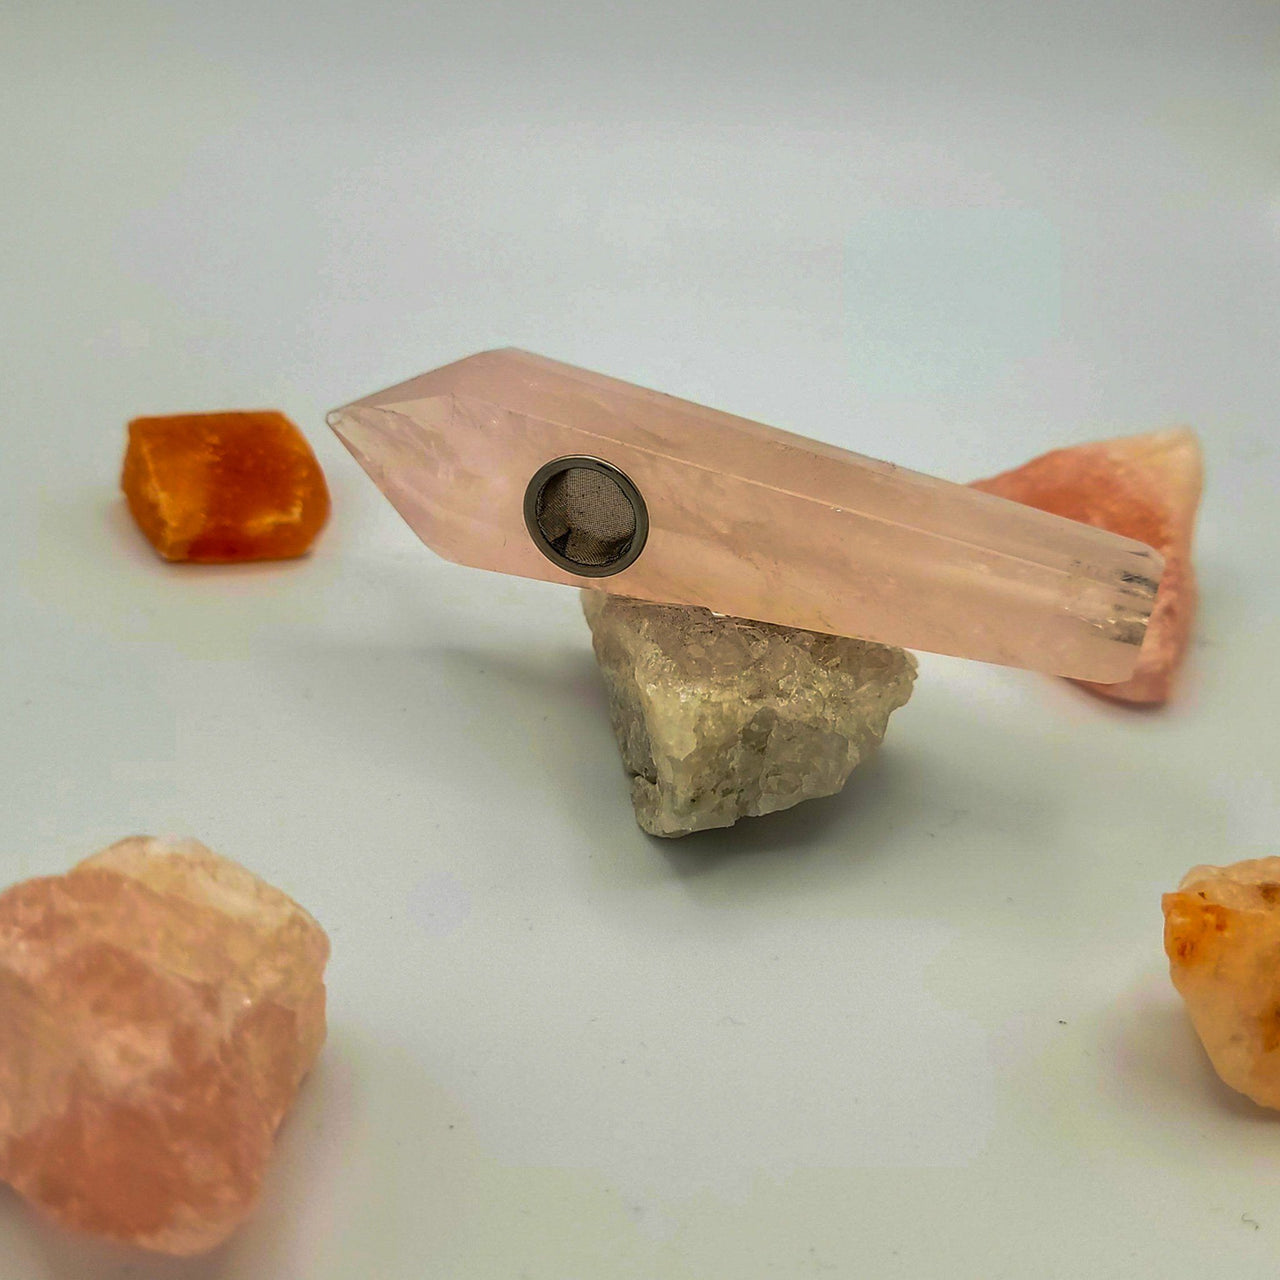 Rose Quartz Crystal Pipe, add one to your bag today! If you need any assistance purchasing, feel free to reach out to our helpful team and we can review your order and needs.